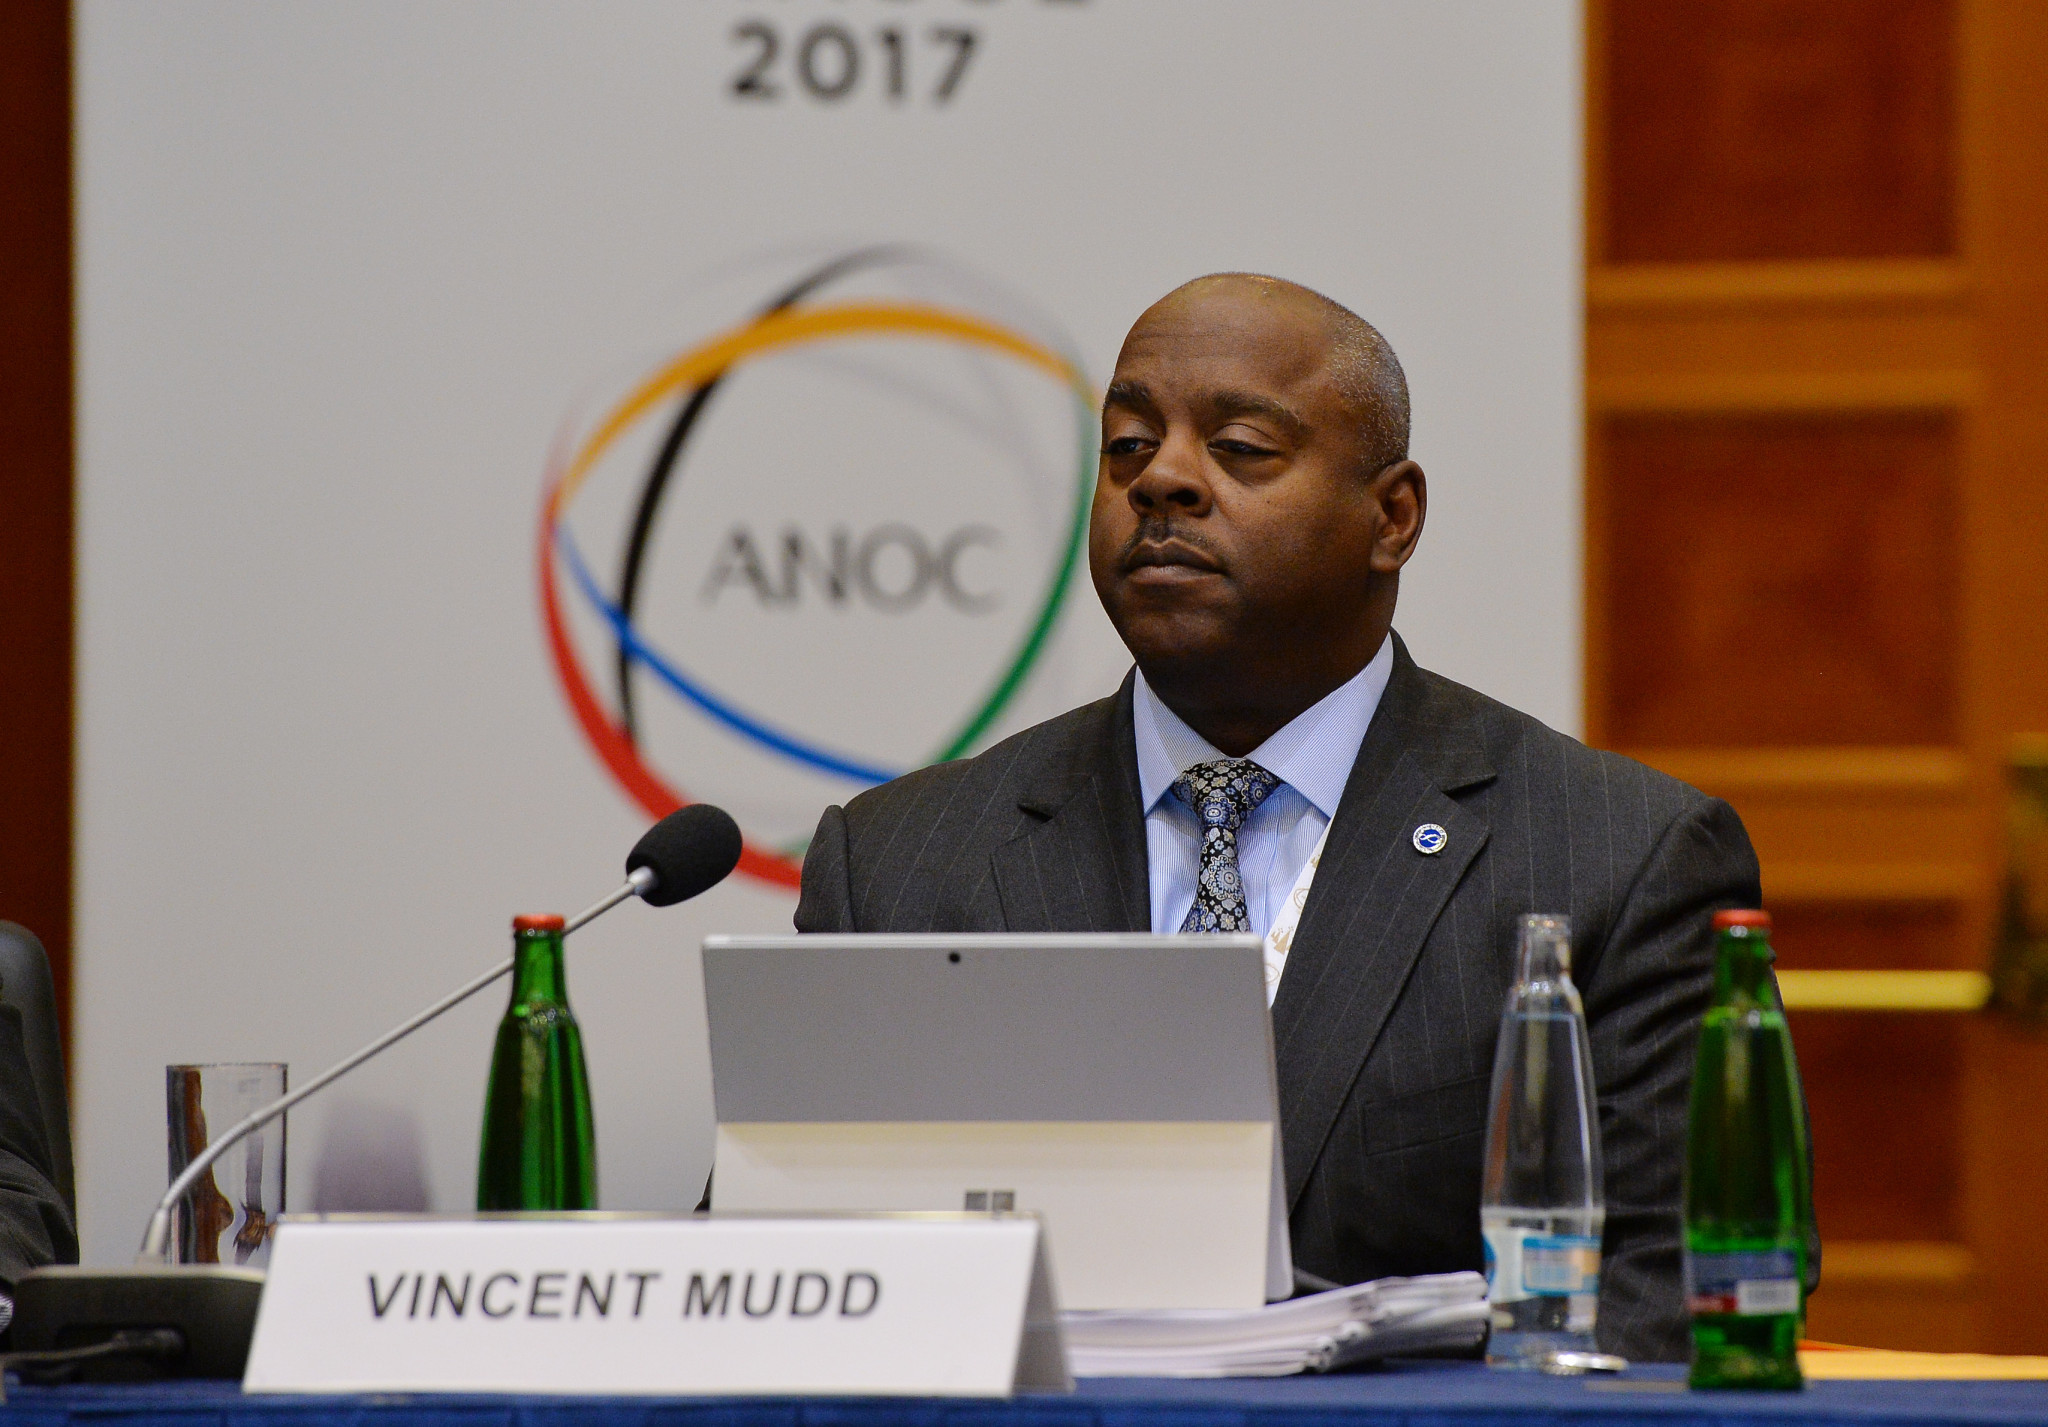 Vincent Mudd, head of the Organising Committee for the World Beach Games, at today's meeting ©Getty Images